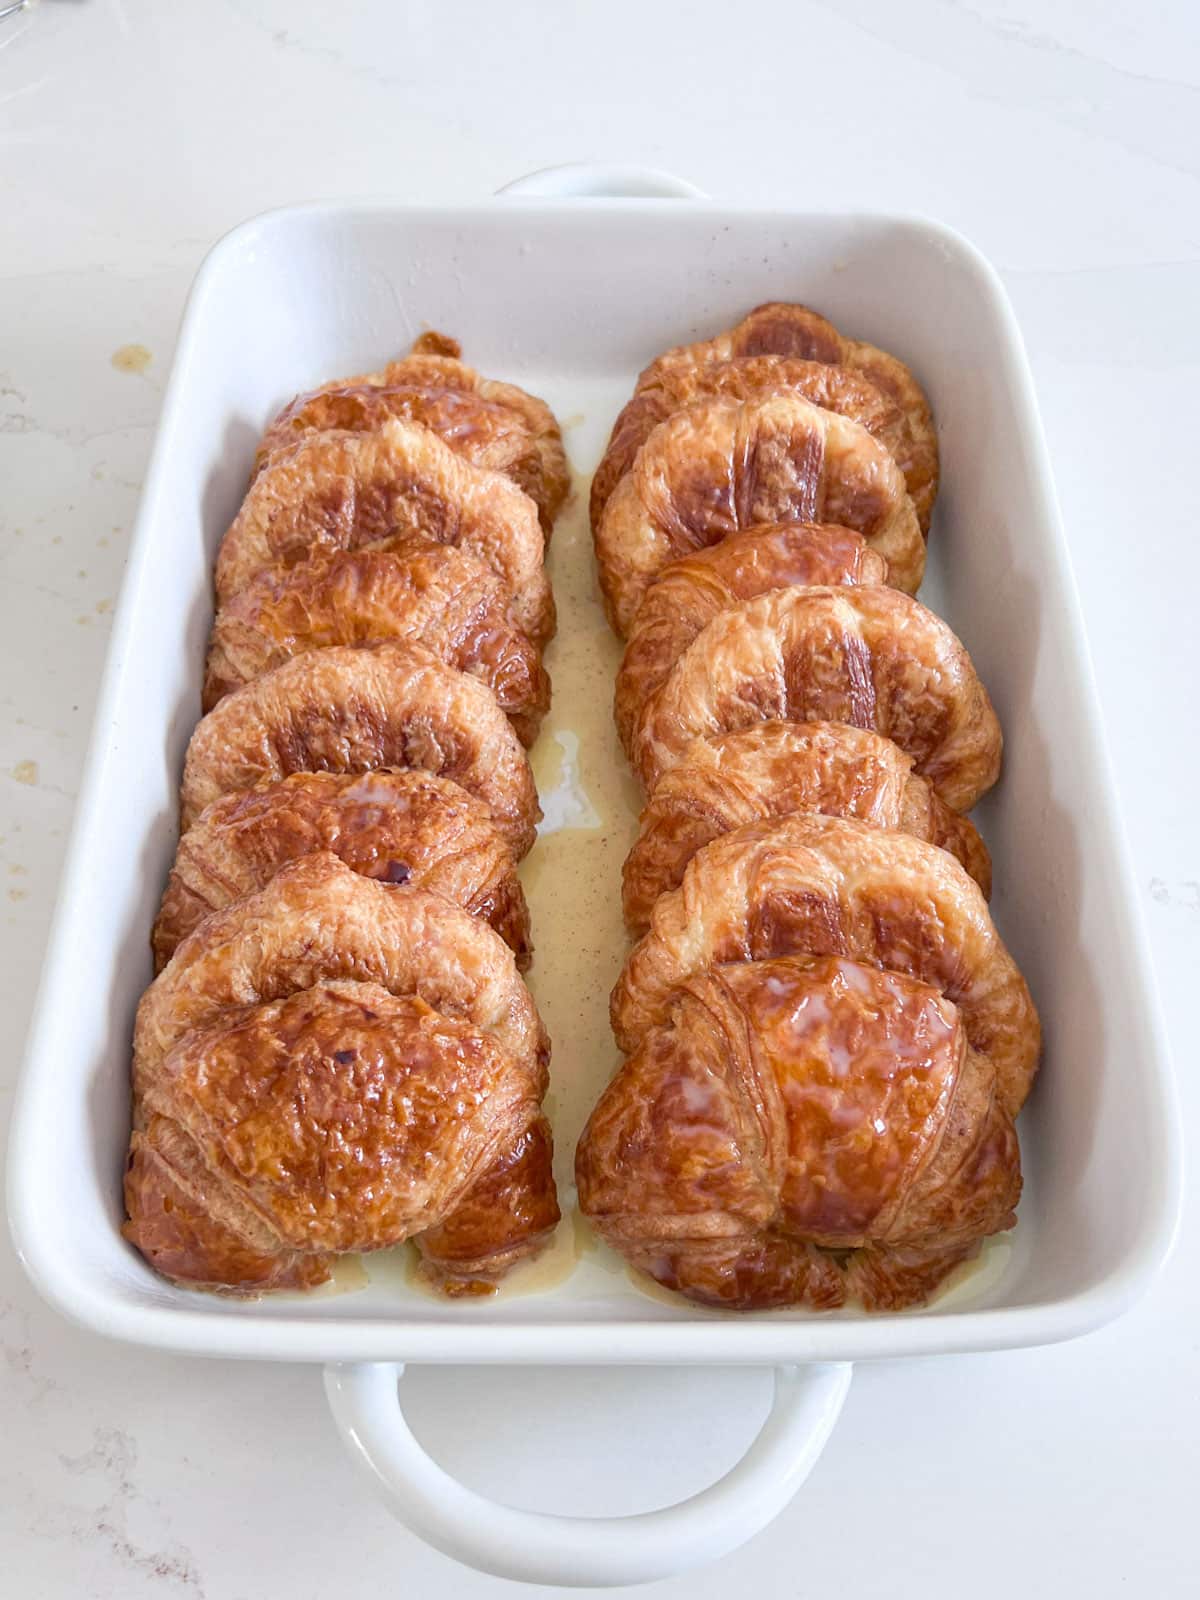 Shingled croissant halves in a white baking pan with the remaining custard poured over them.